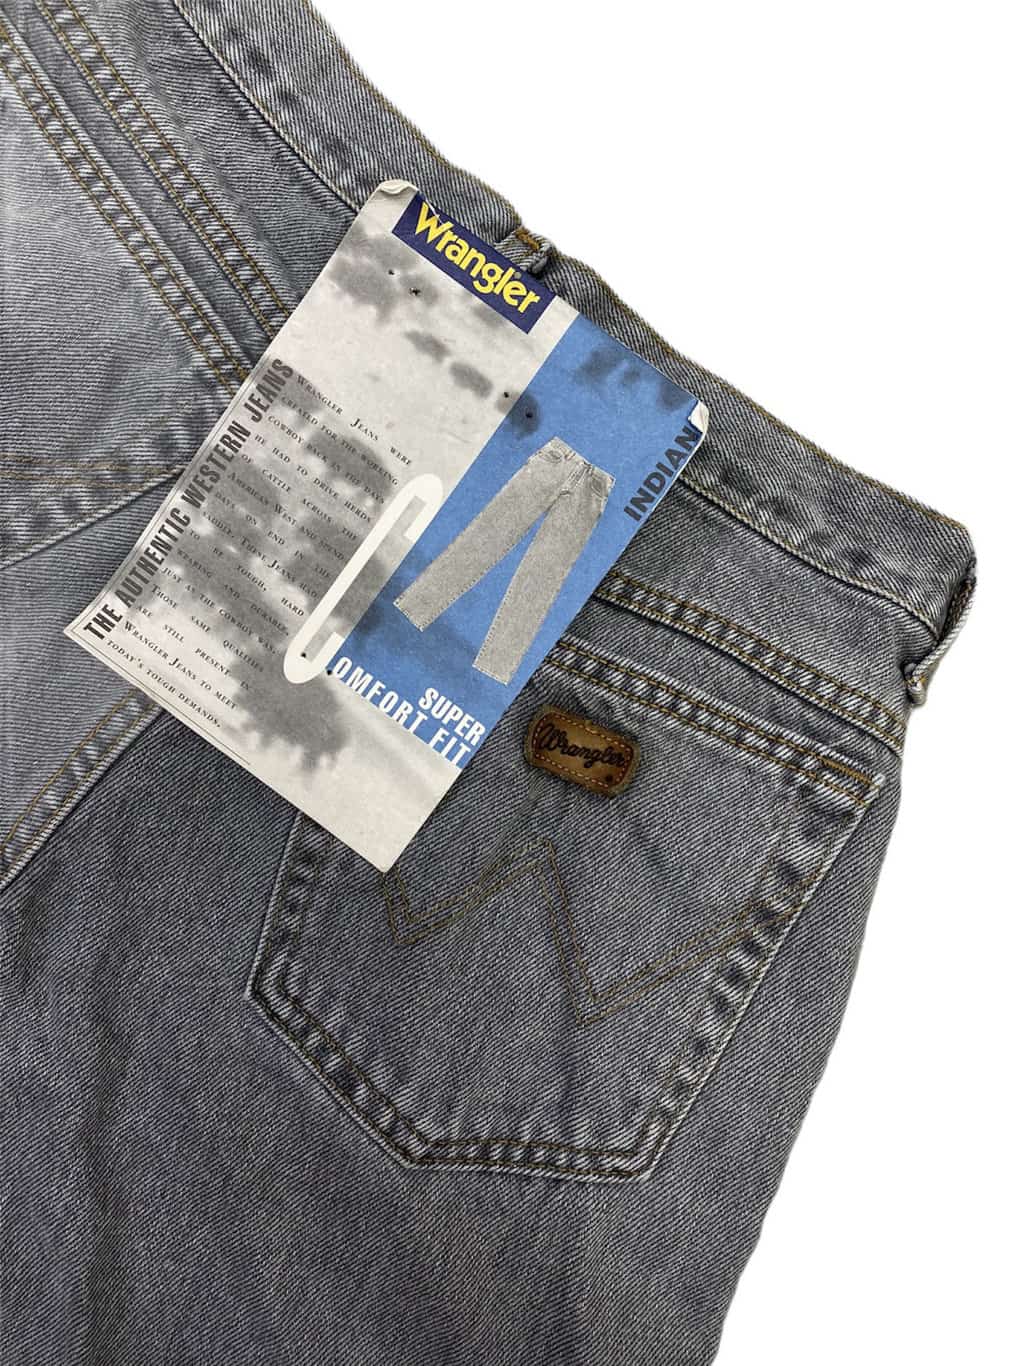 90s Vintage Wrangler Indiana jeans in grey, made in the UK, deadstock - W29  x L32 - St Cyr Vintage